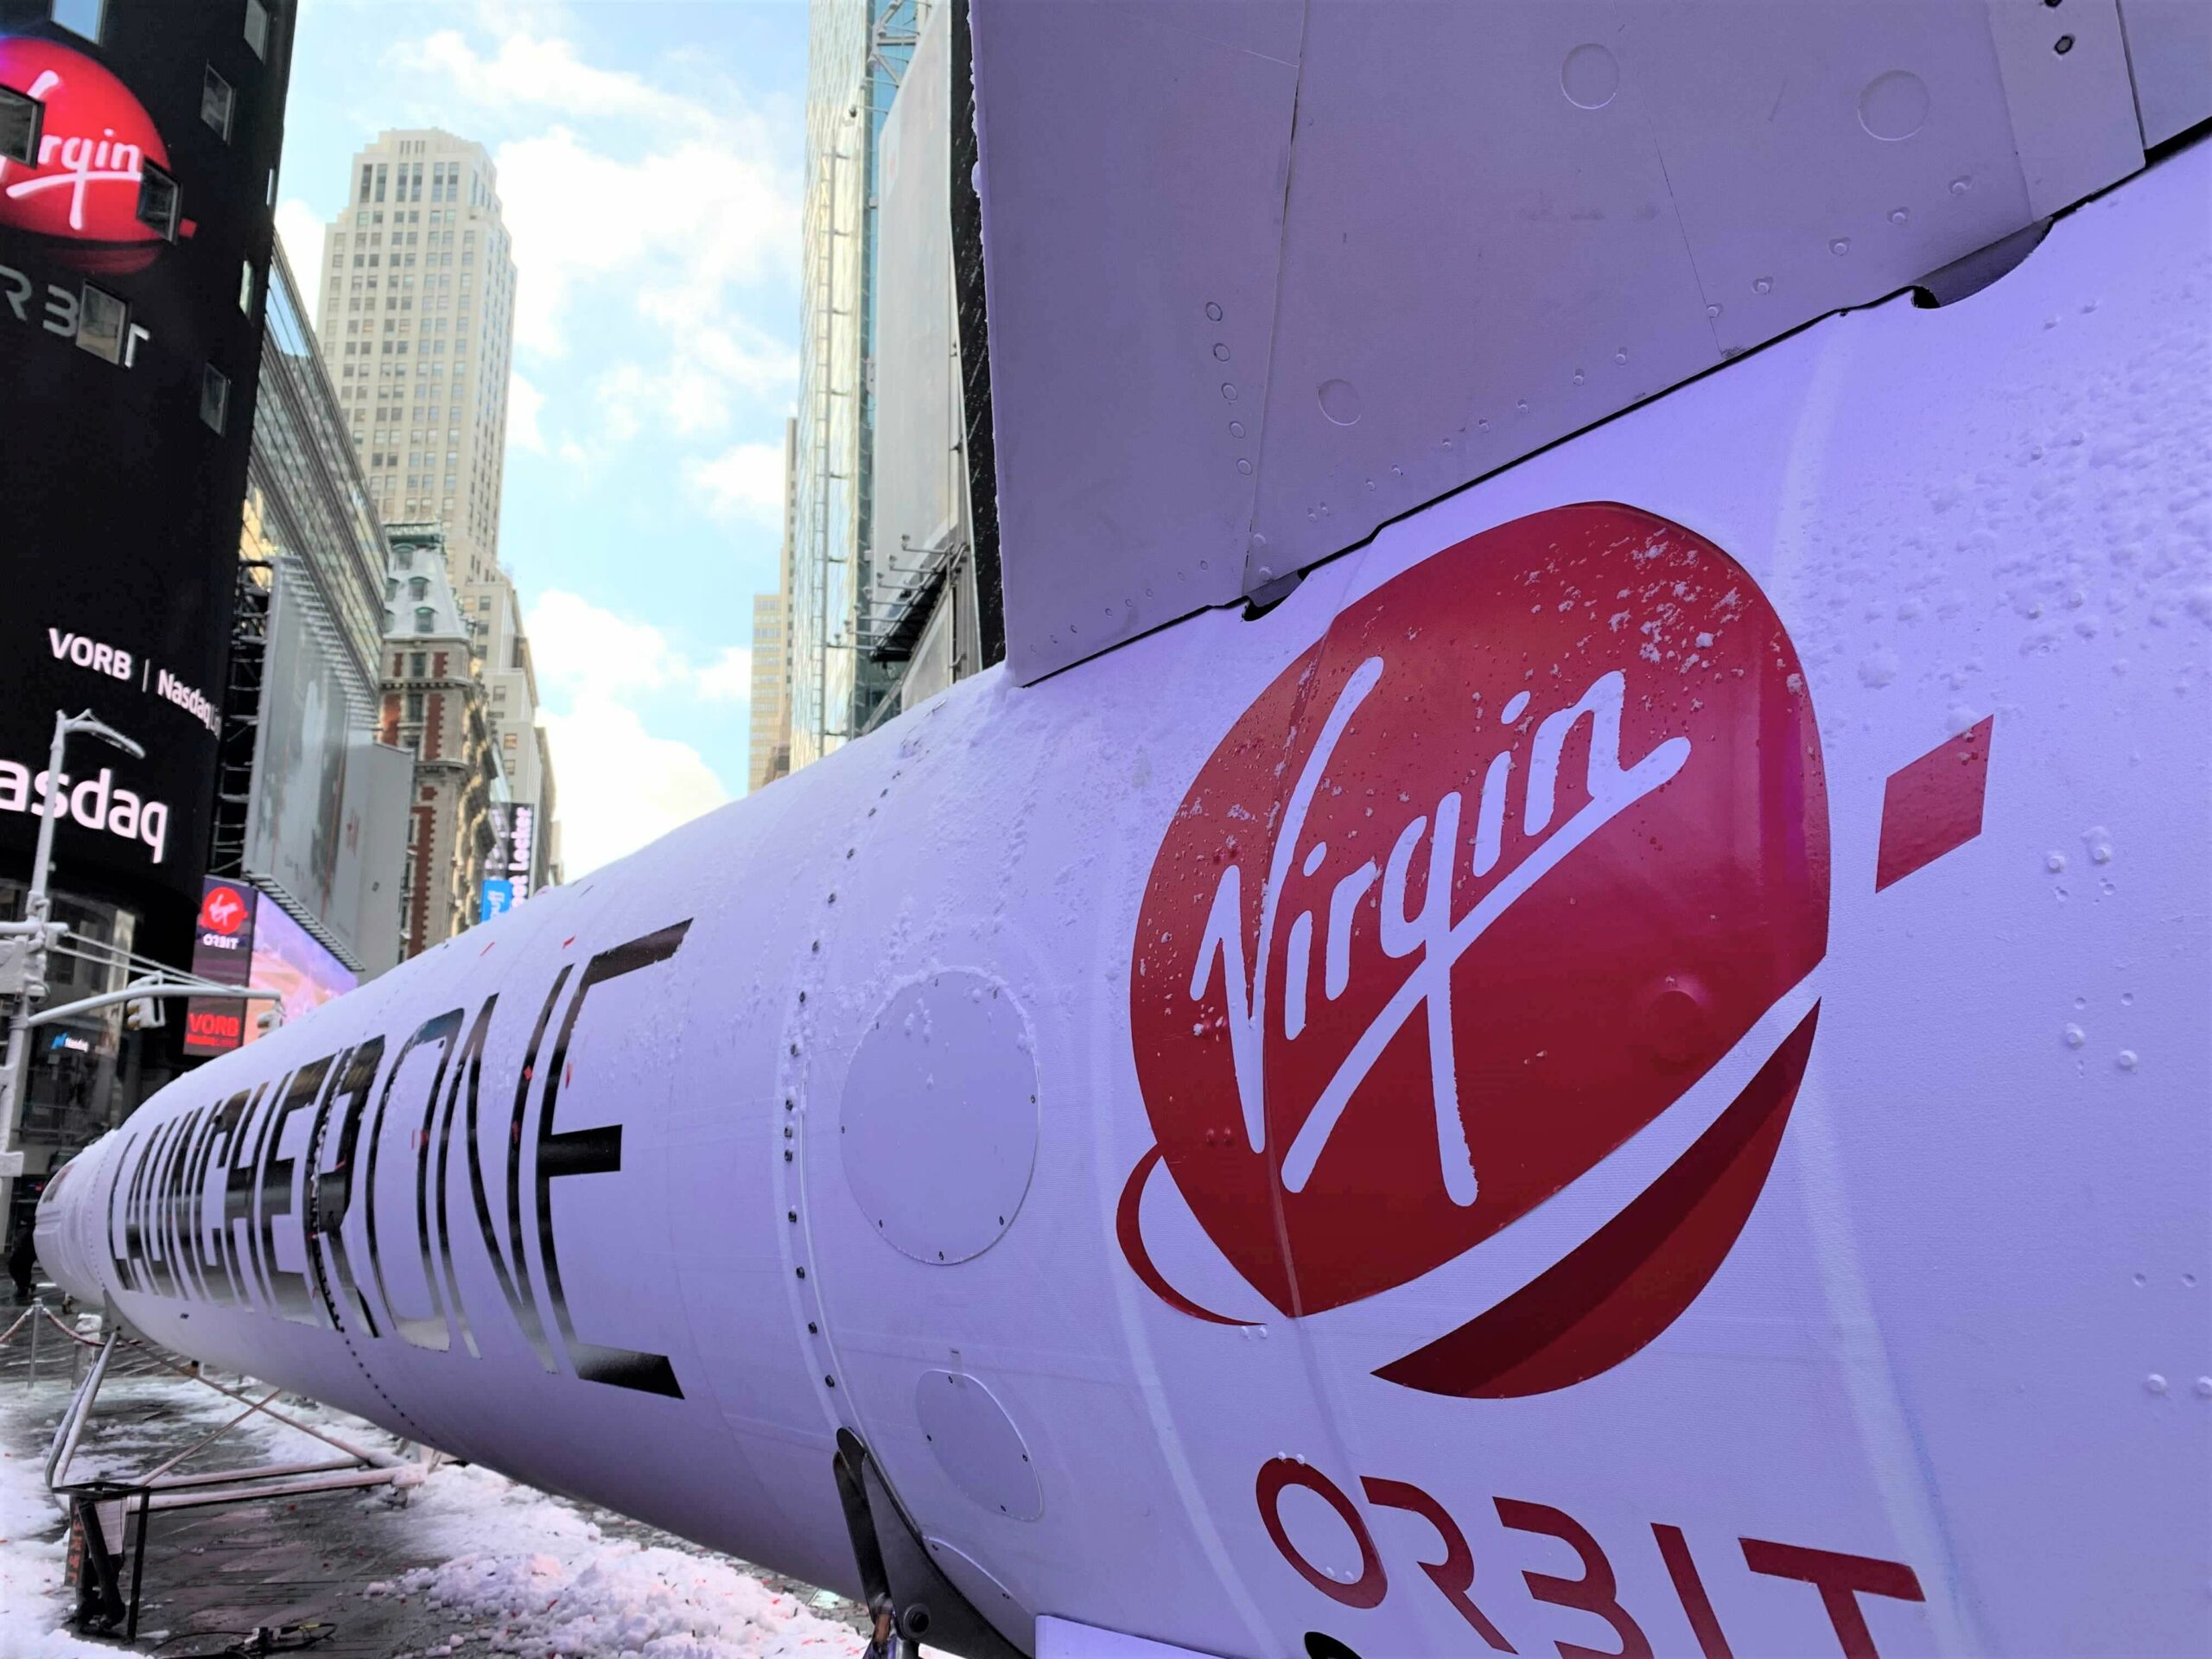 Virgin Orbit stock pops as company shows rocket in Times Square